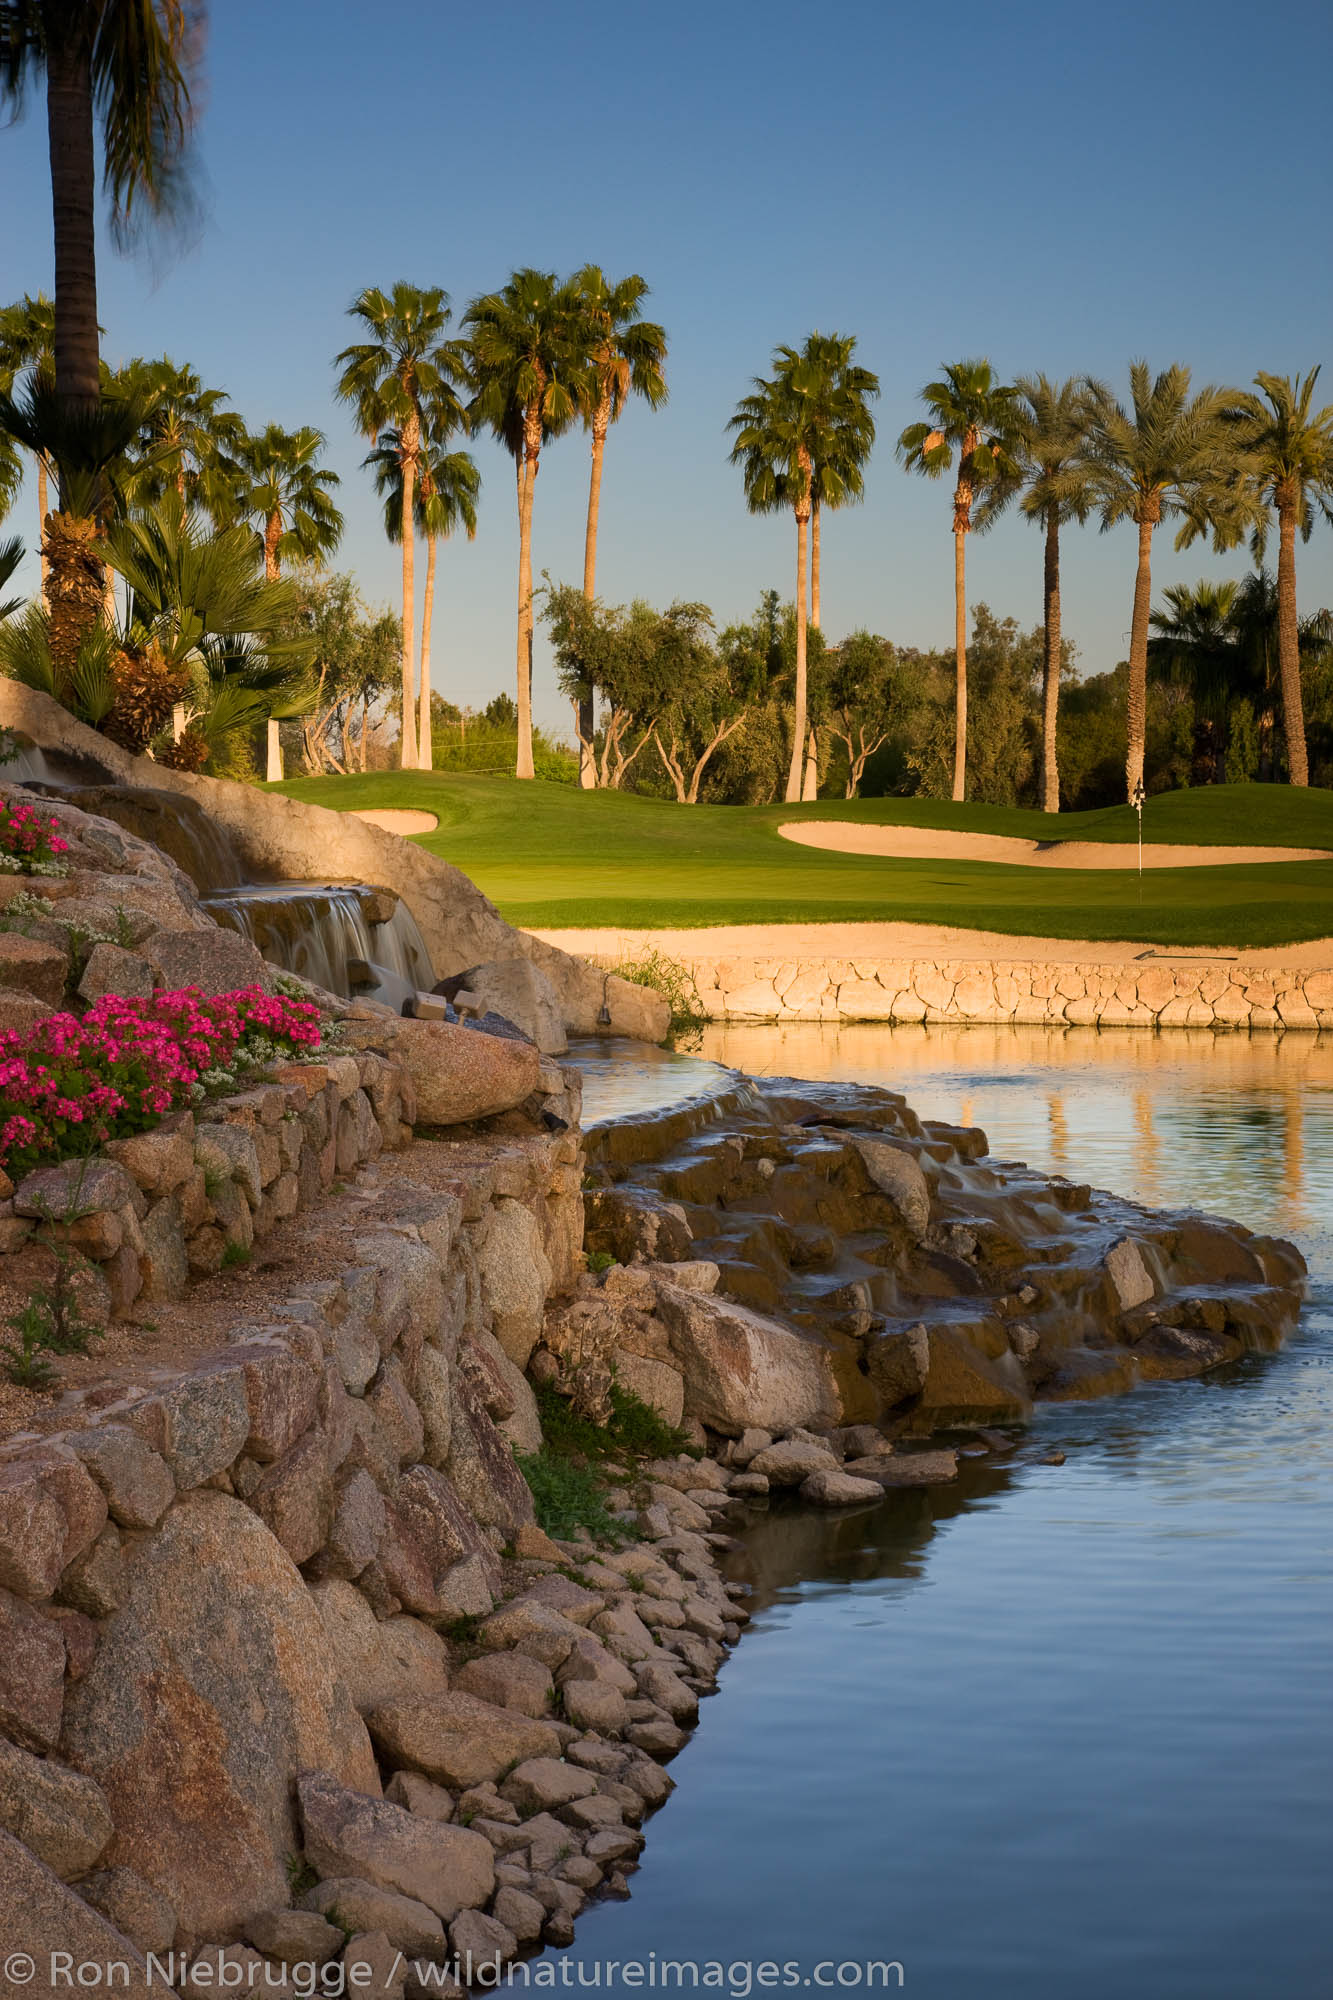 The 8th hole on the Canyon Golf Course at the Phoenician Resort in Scottsdale, Arizona.